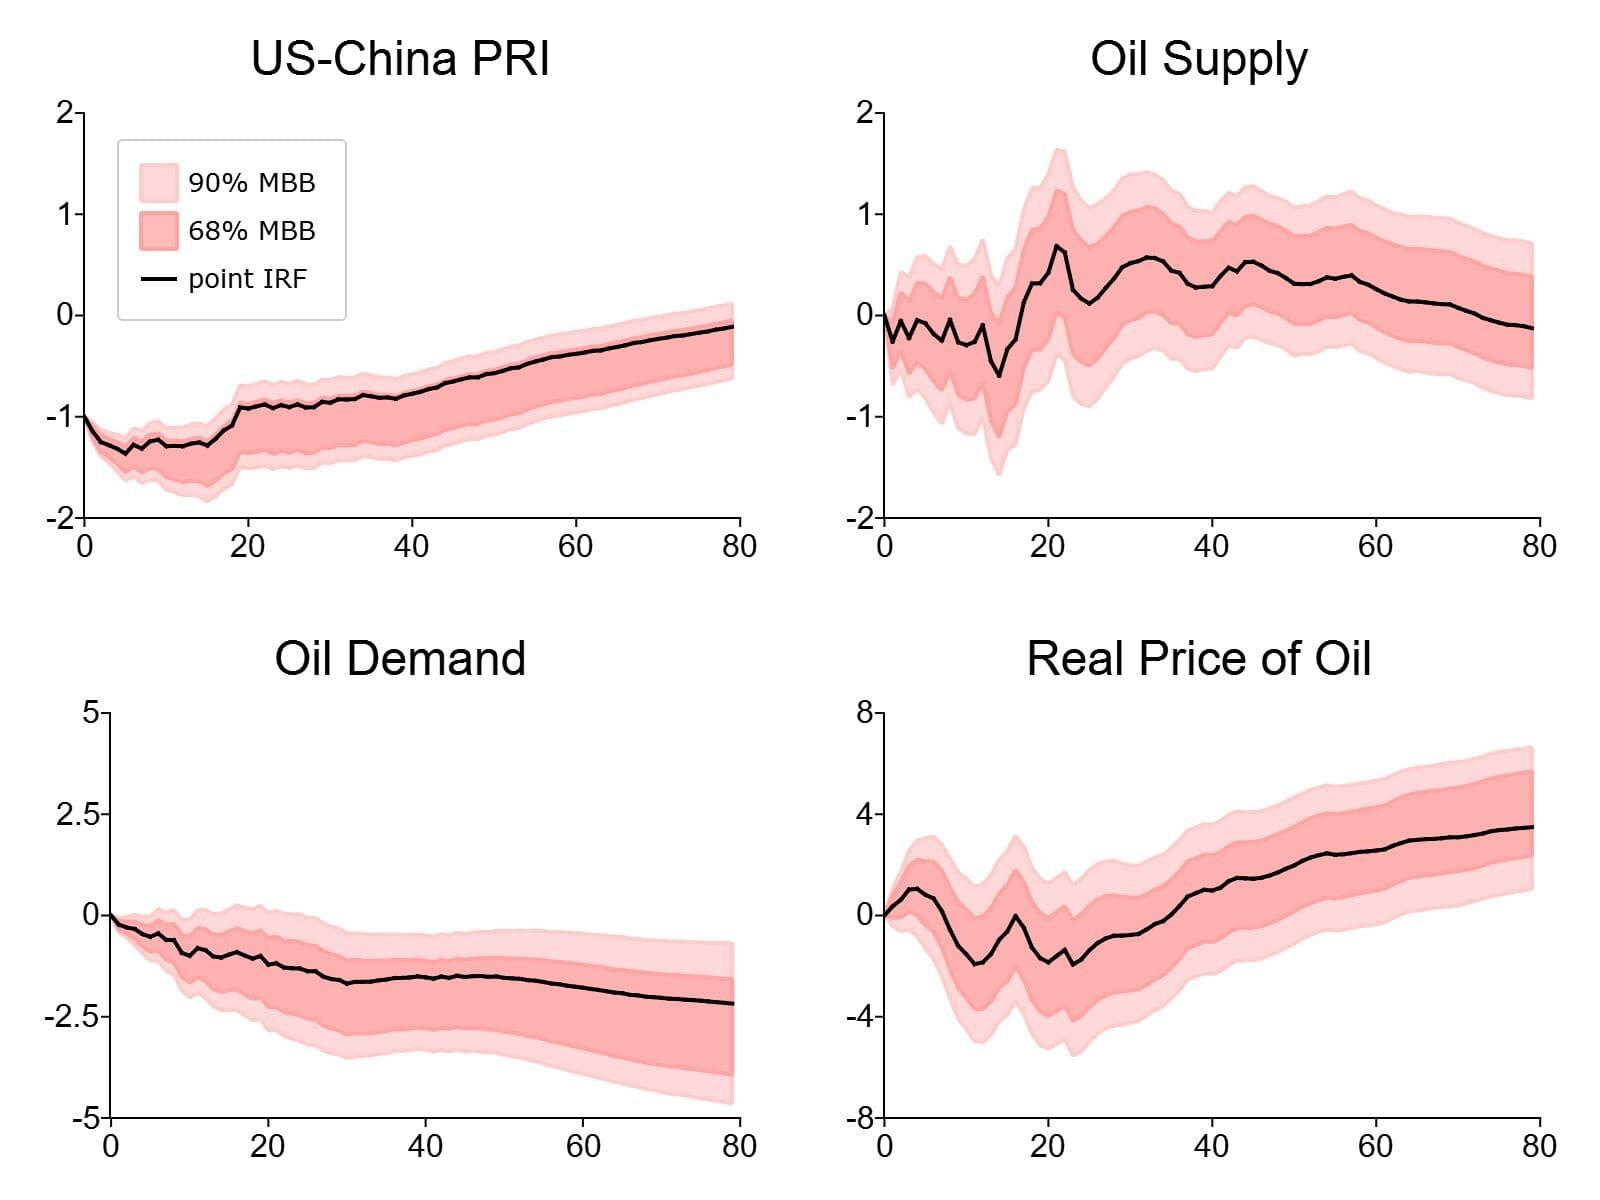 Impulse response functions measuring the impact of 1% change in U.S/China Political Relationship Index on oil market conditions.